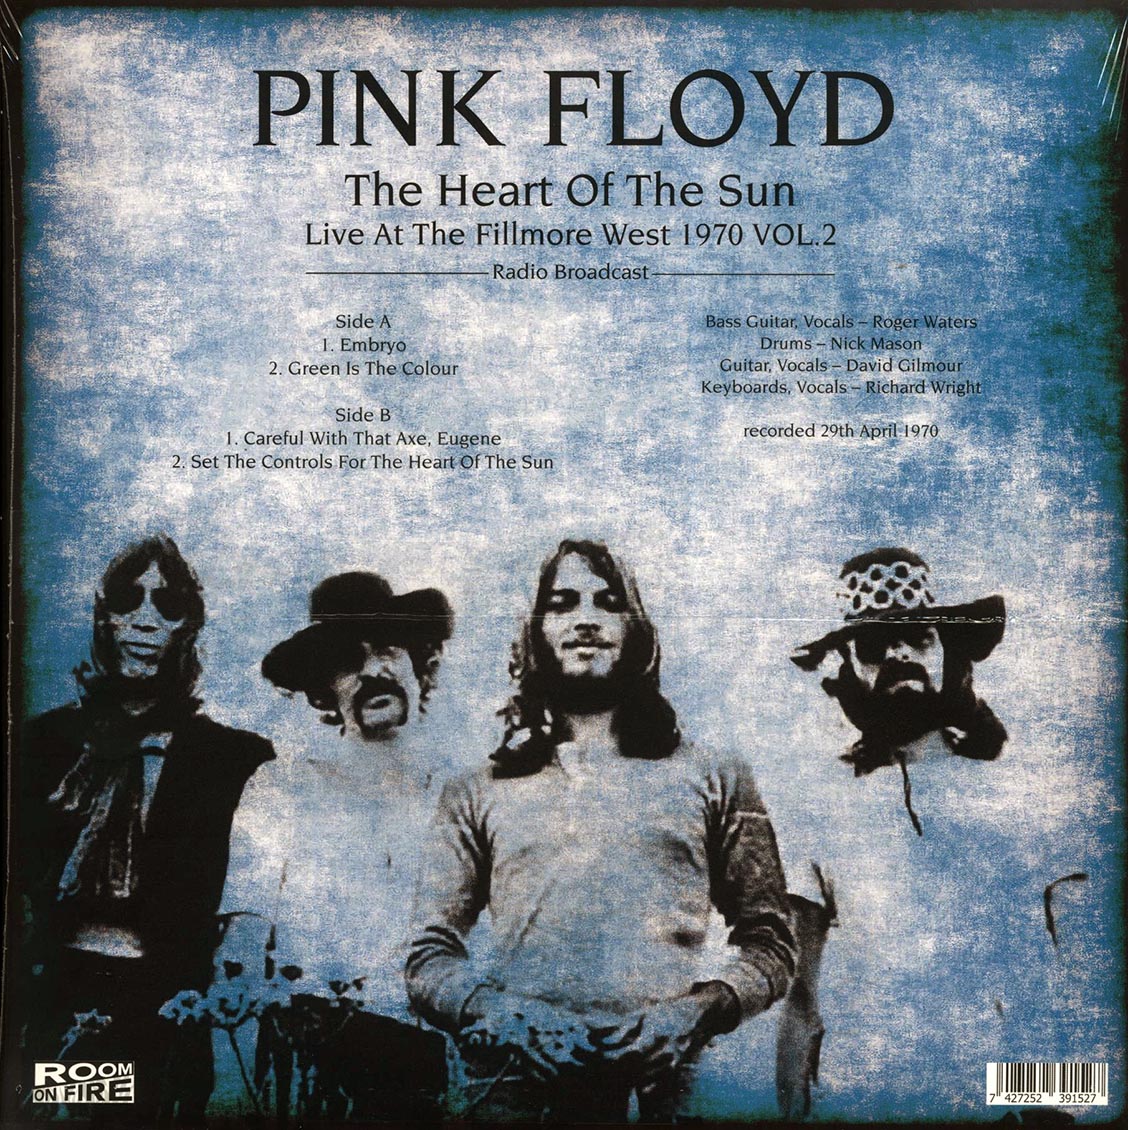 Pink Floyd - The Heart Of The Sun Volume 2: Live At The Fillmore West 1970